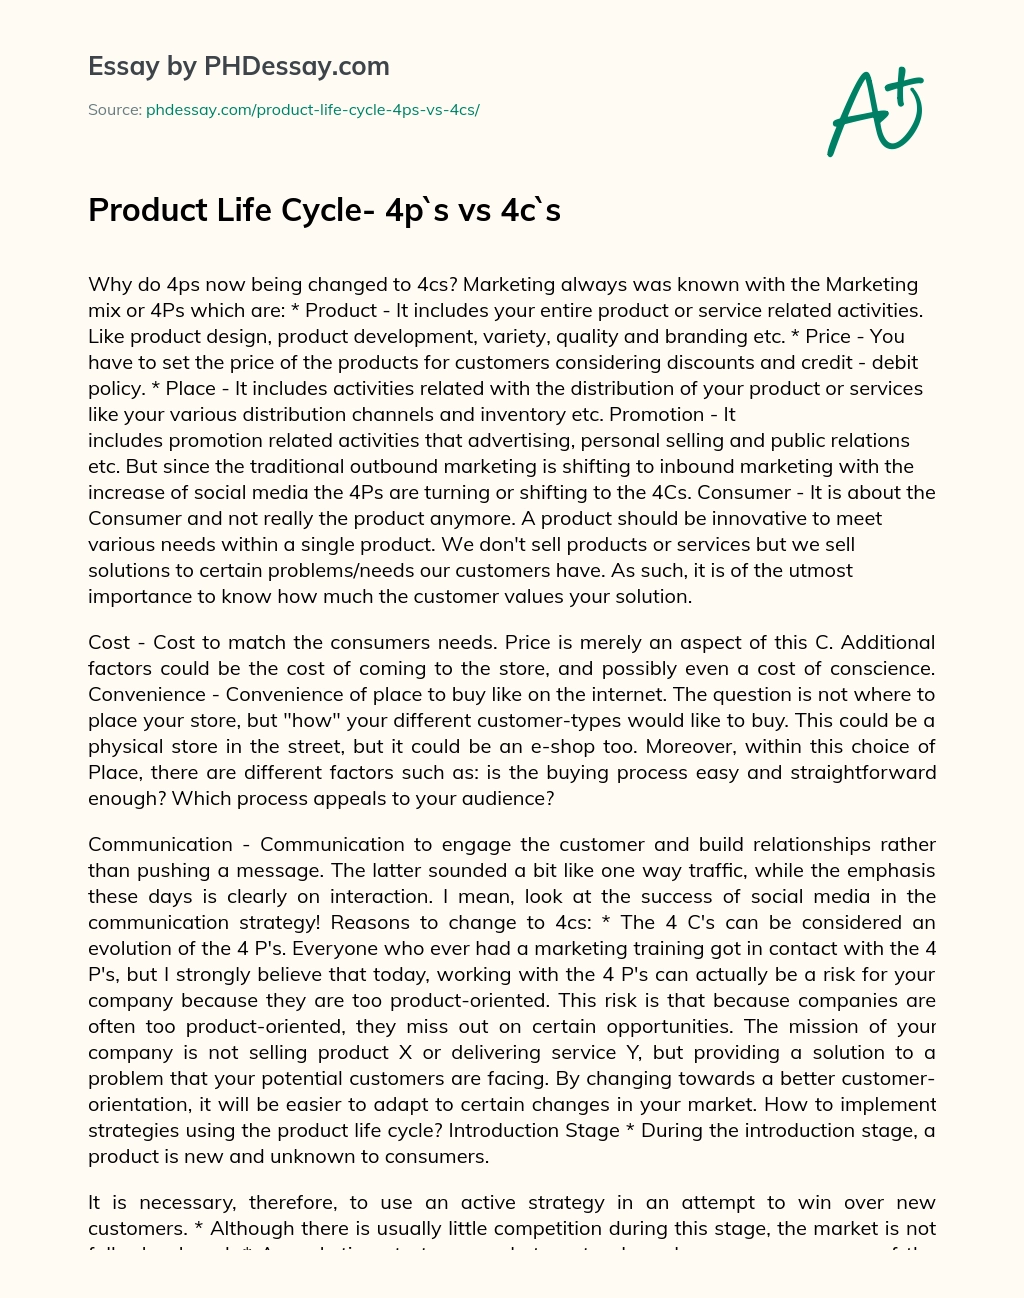 Product Life Cycle- 4p`s vs 4c`s essay